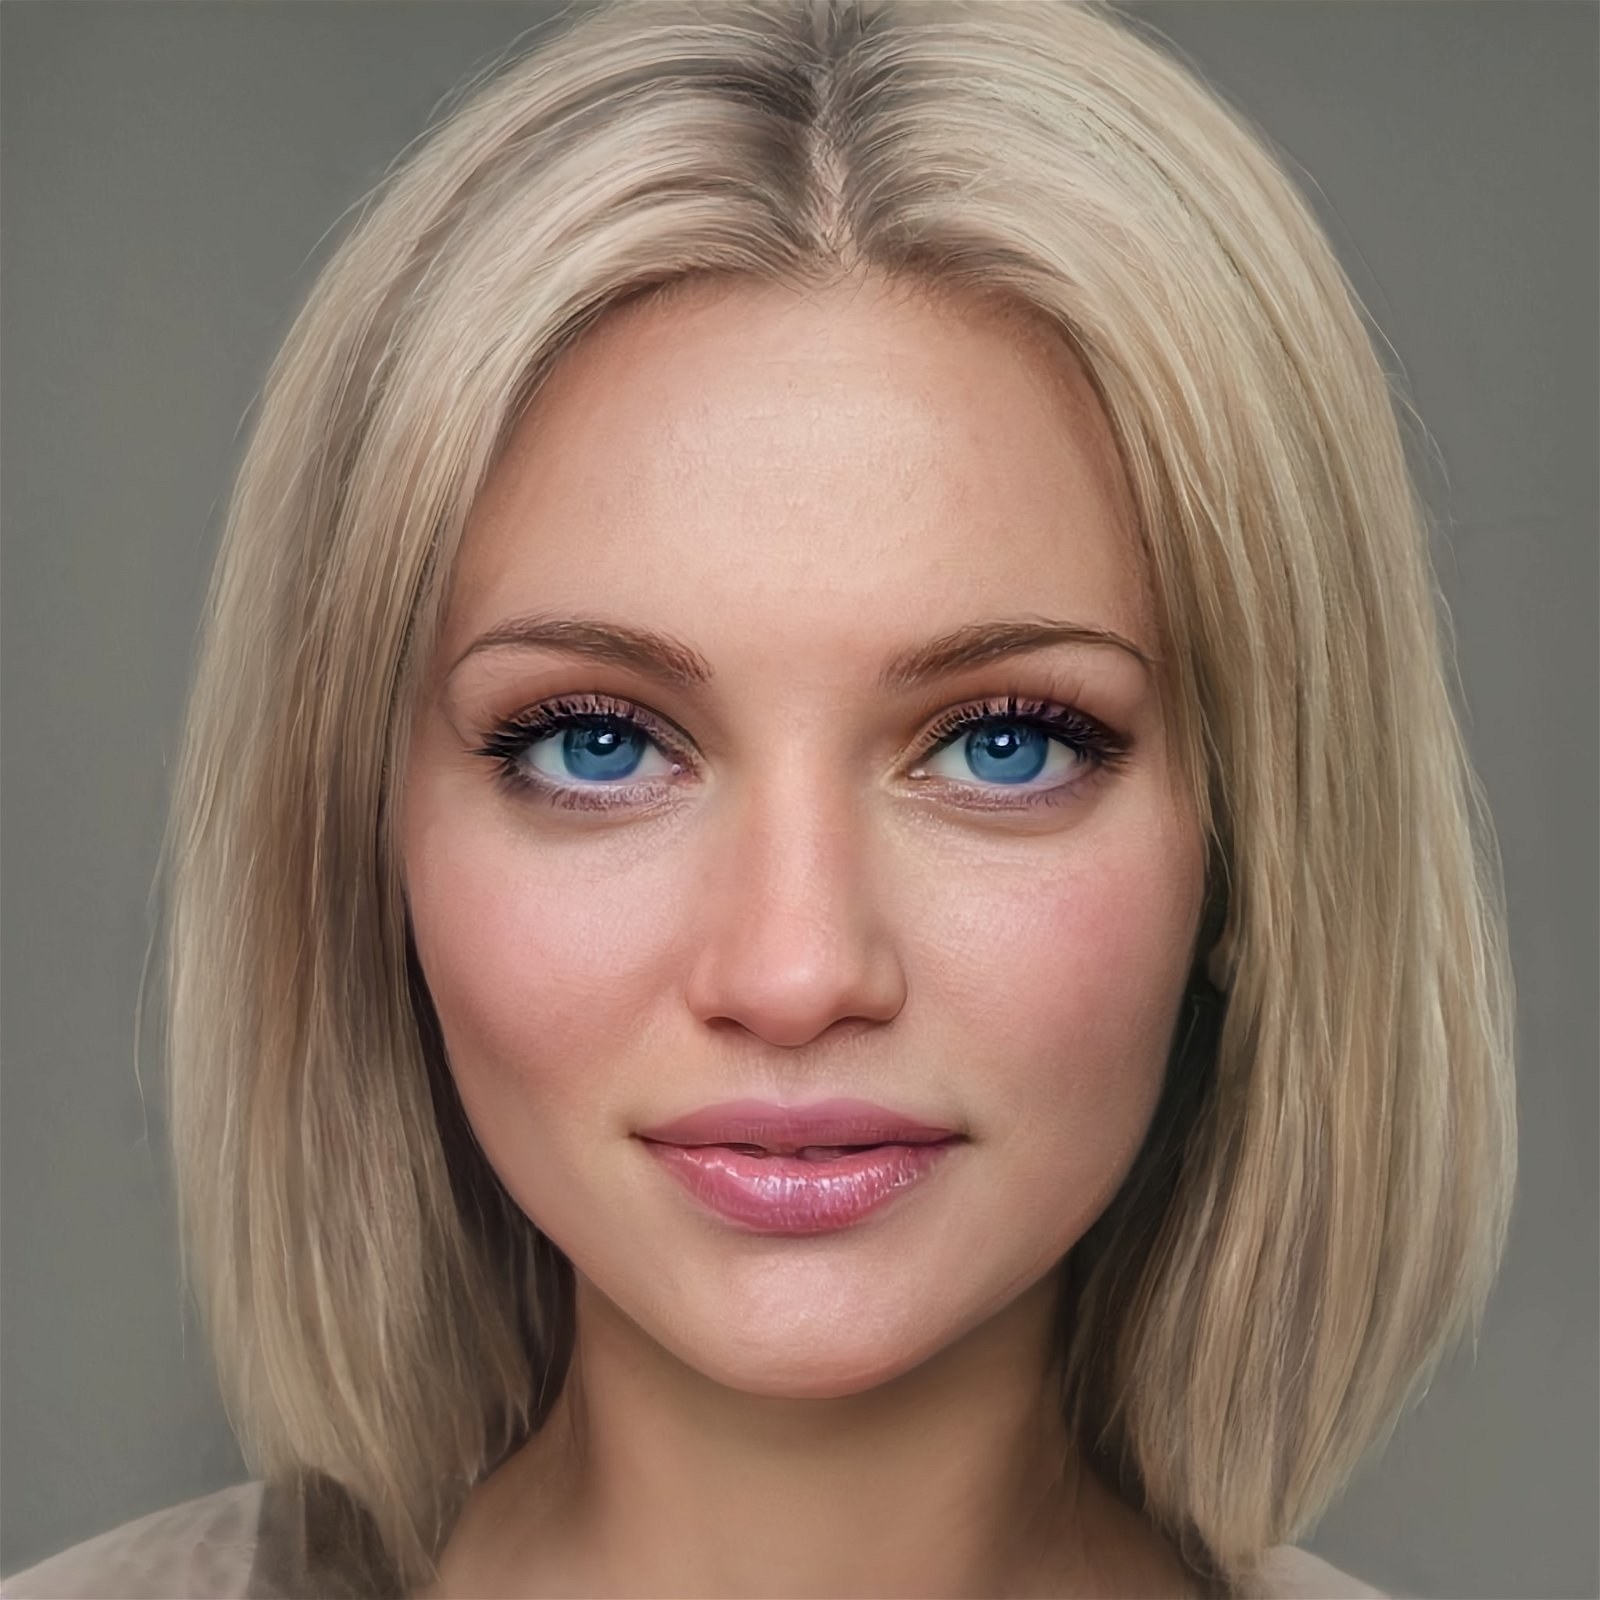 a girl with blue eyes and short blonde hair